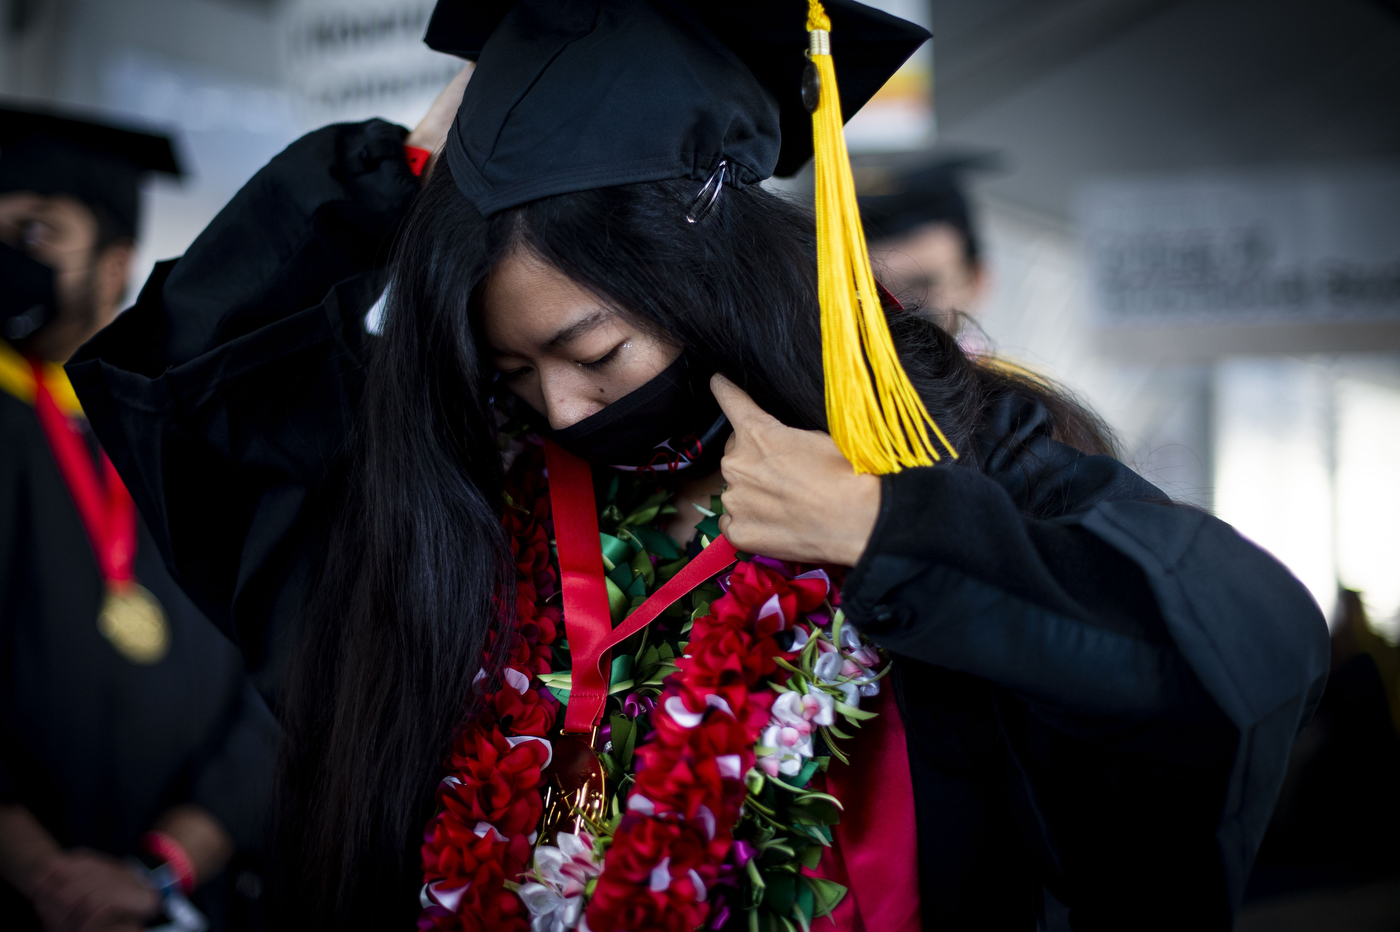 a graduate holds on to a cap, while checking the rest of their outfit